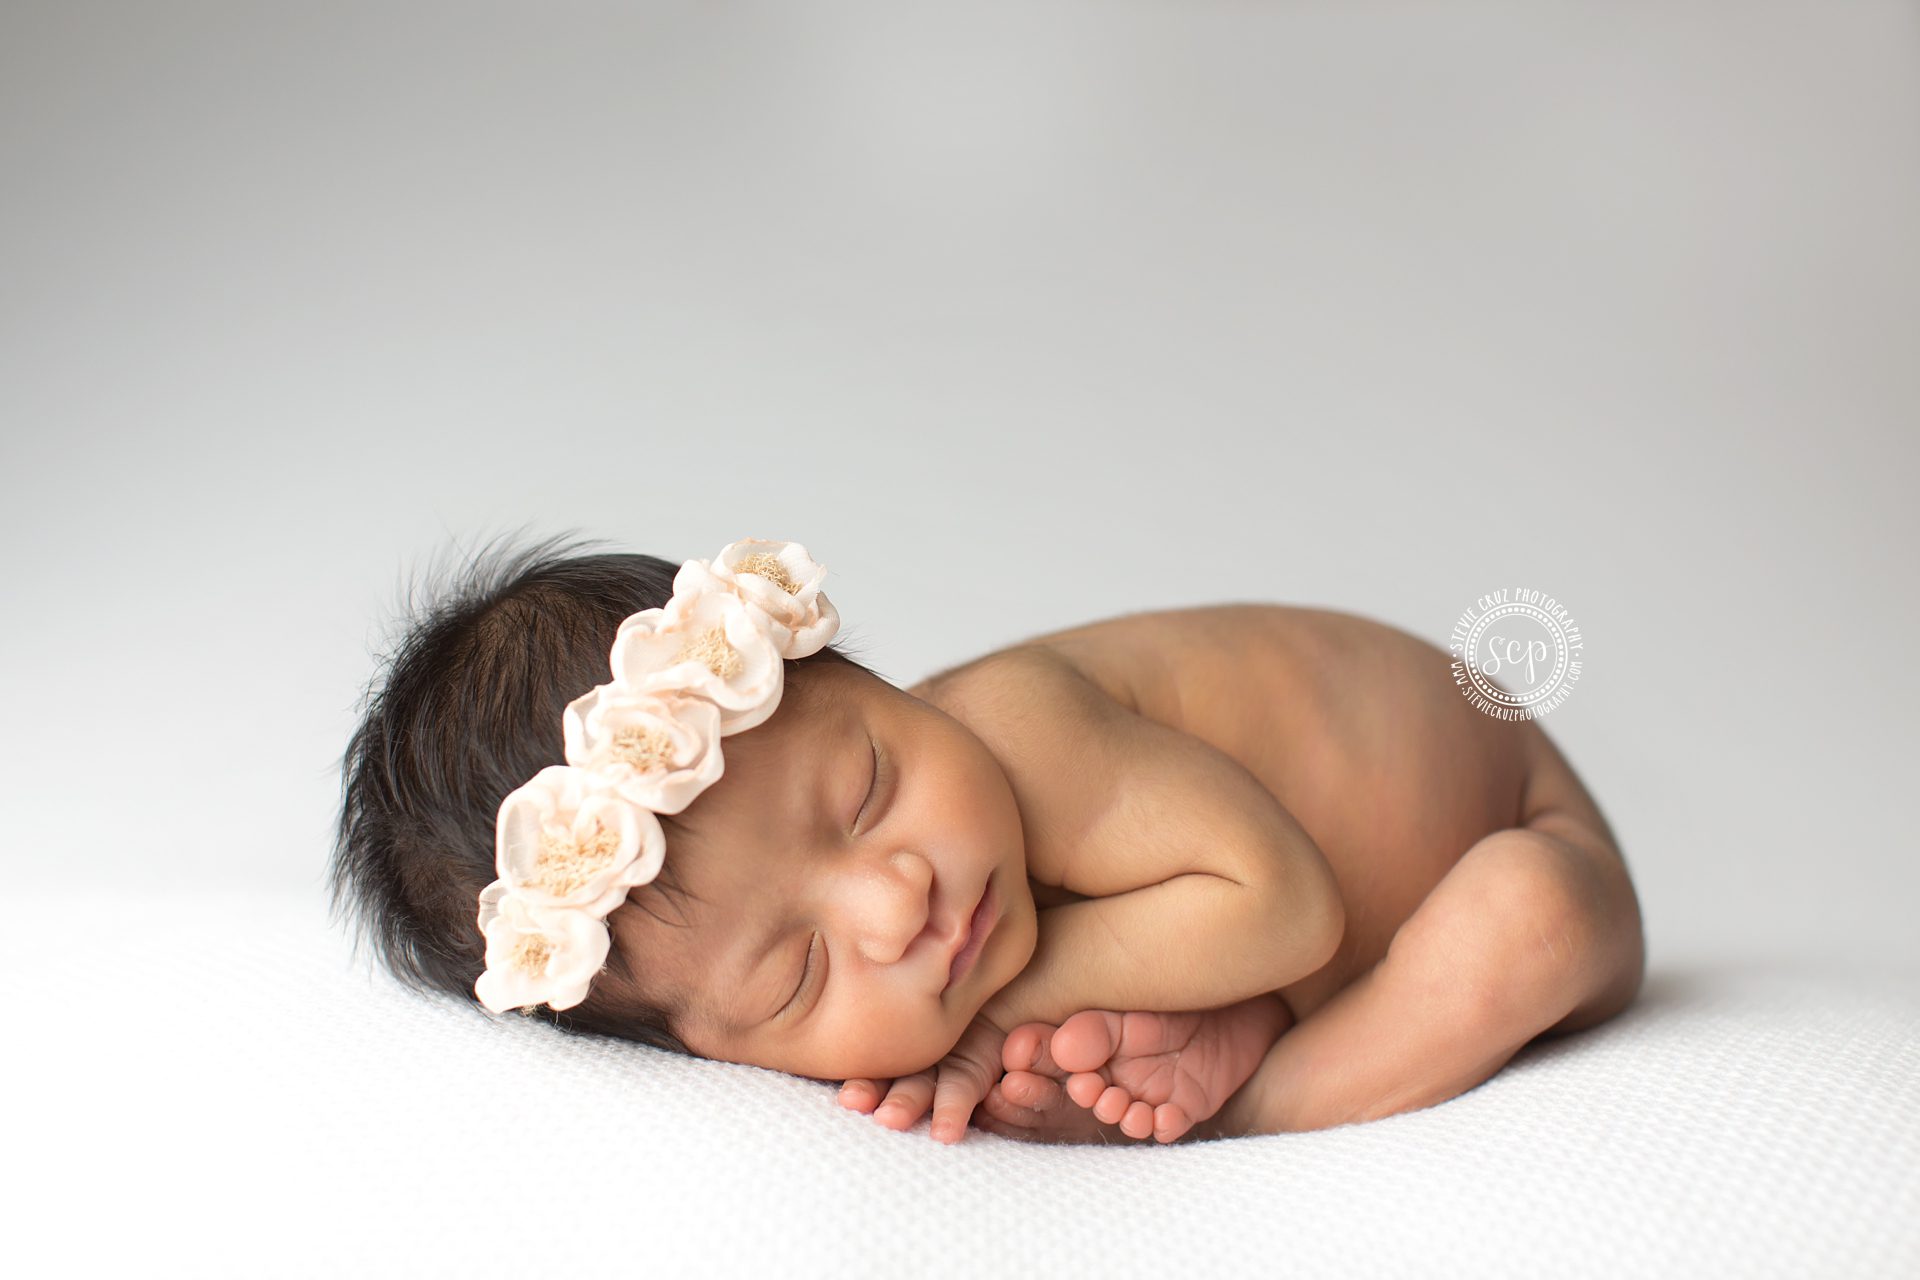 Professional newborn baby photographer in Orange County captures this precious baby girl. Love her floral head band